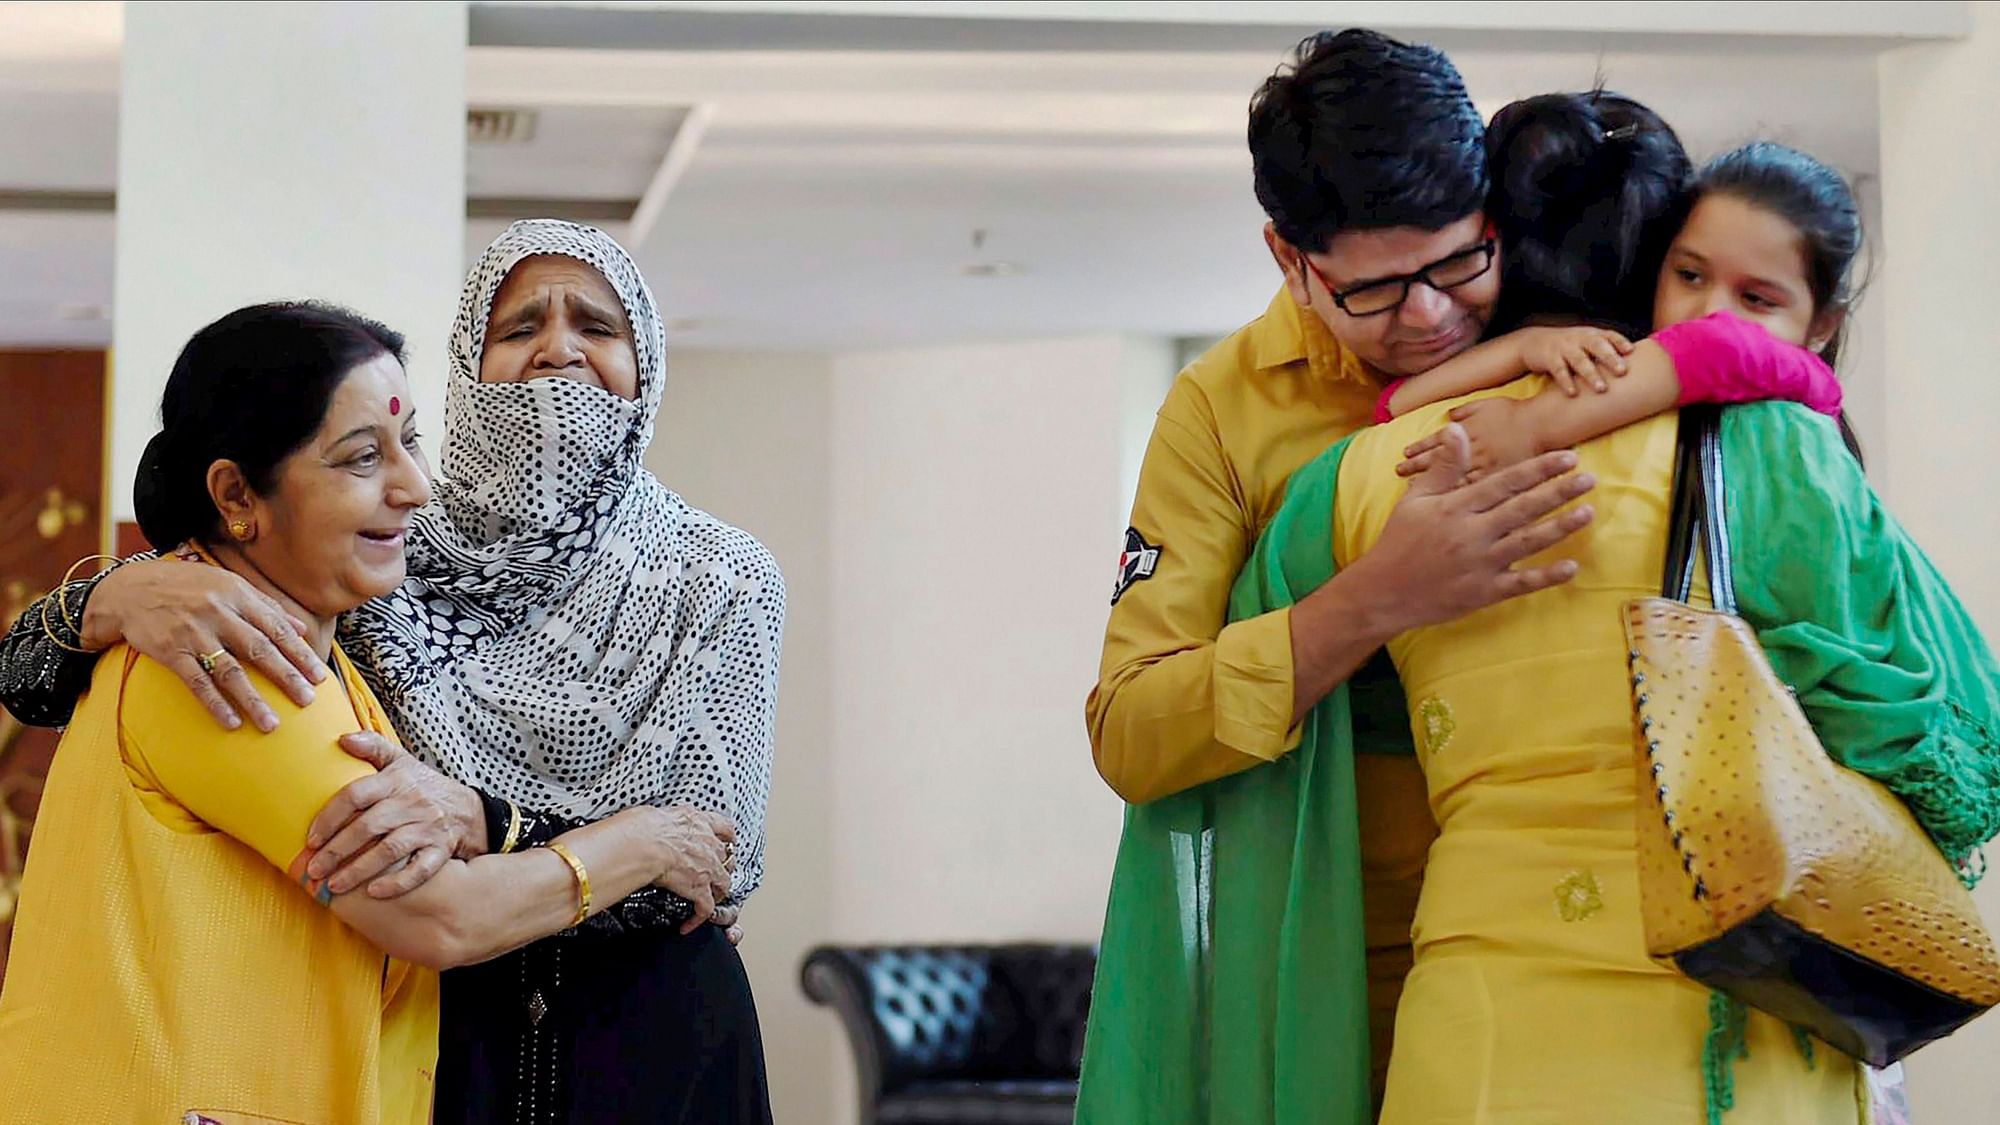  In this 25 May 2017 file photo, Sushma Swaraj is seen with Uzma Ahmed as she gets emotional while uniting with her family during a press conference at Jawahar Bhawan in New Delhi.